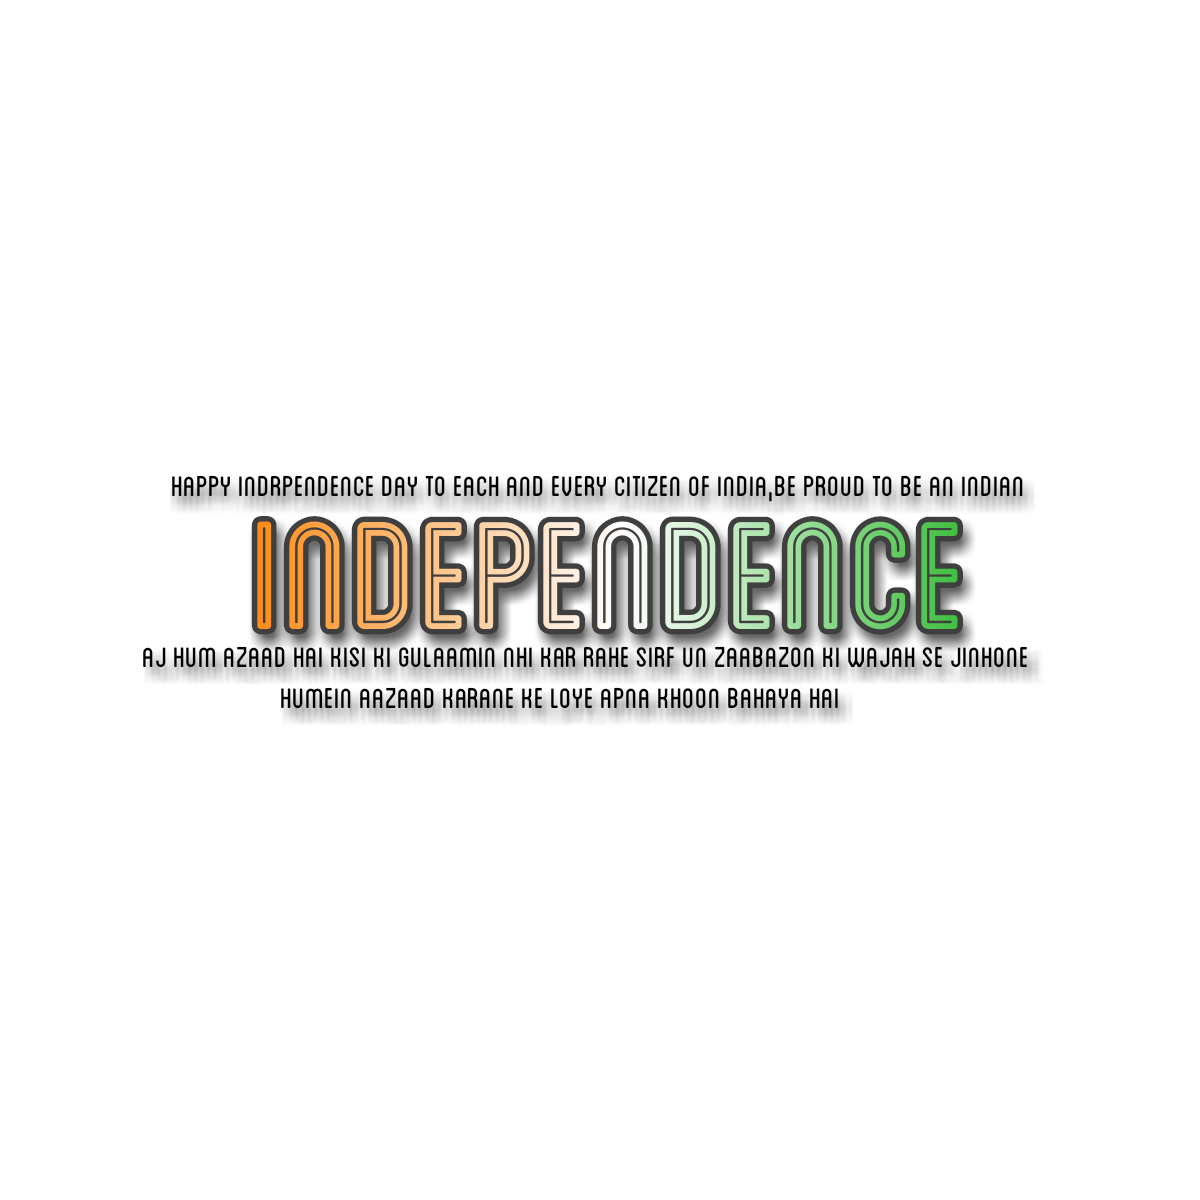 Indian Independence Day PNG Image Background